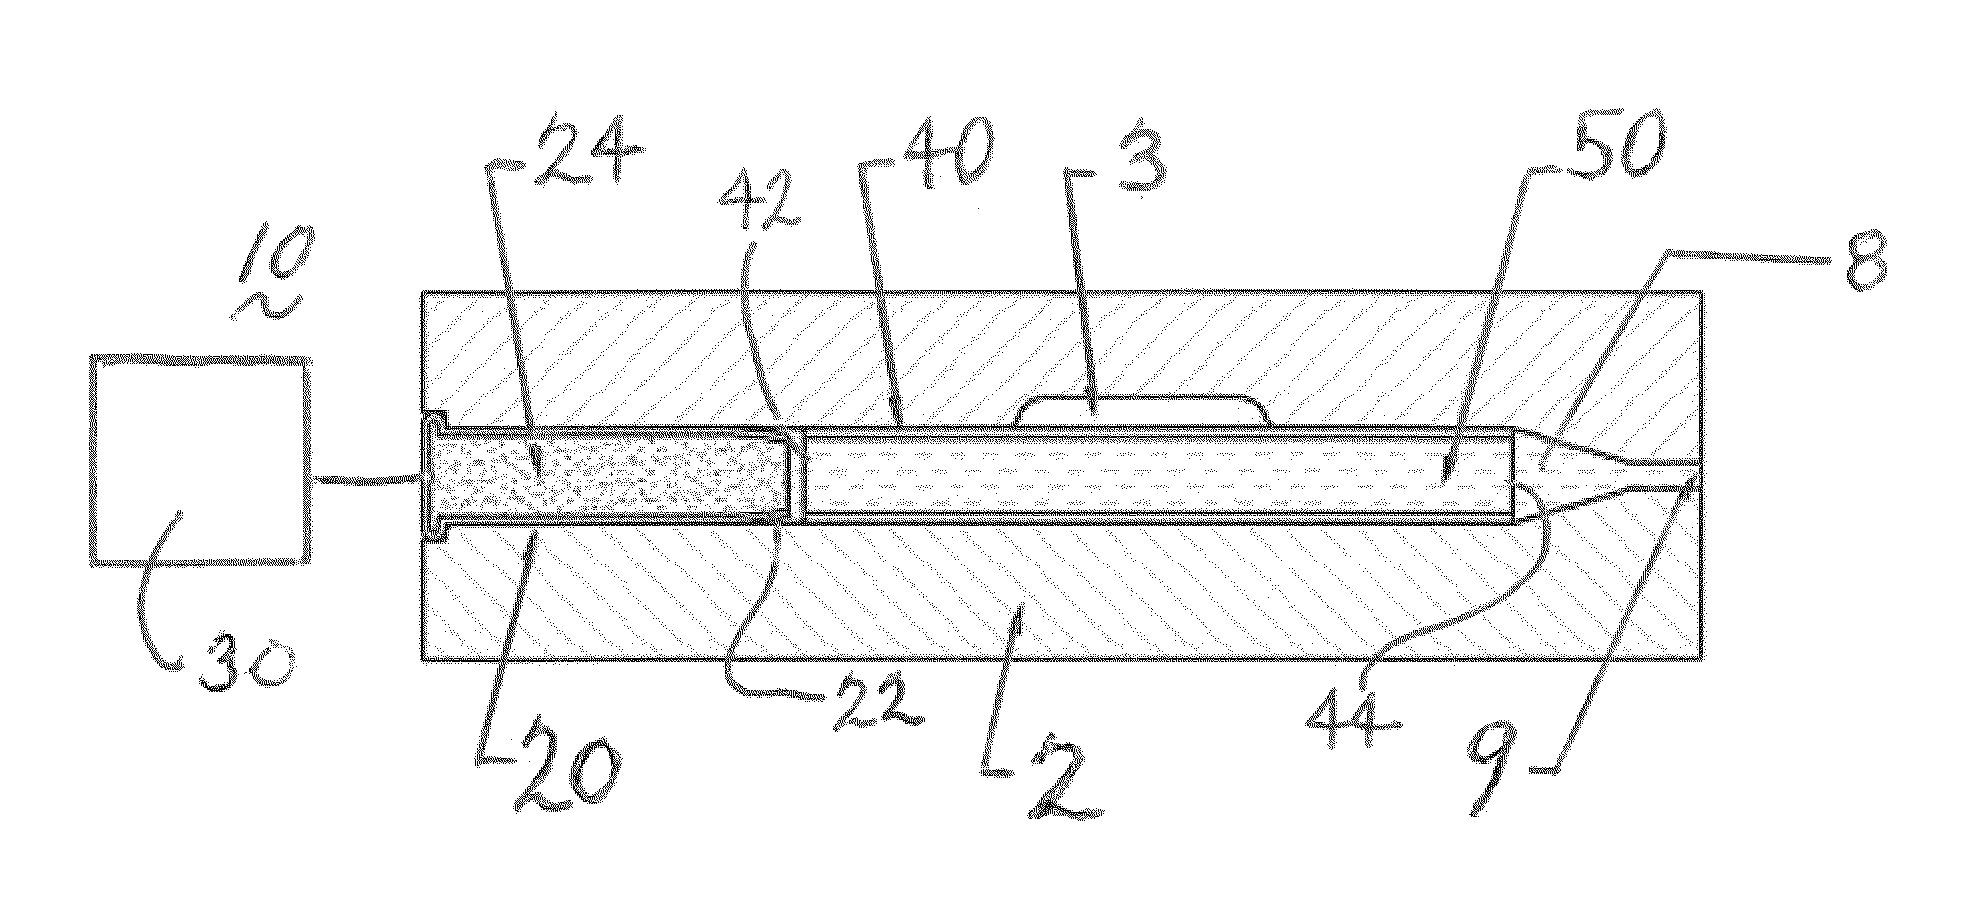 System and method for forming of tubular parts